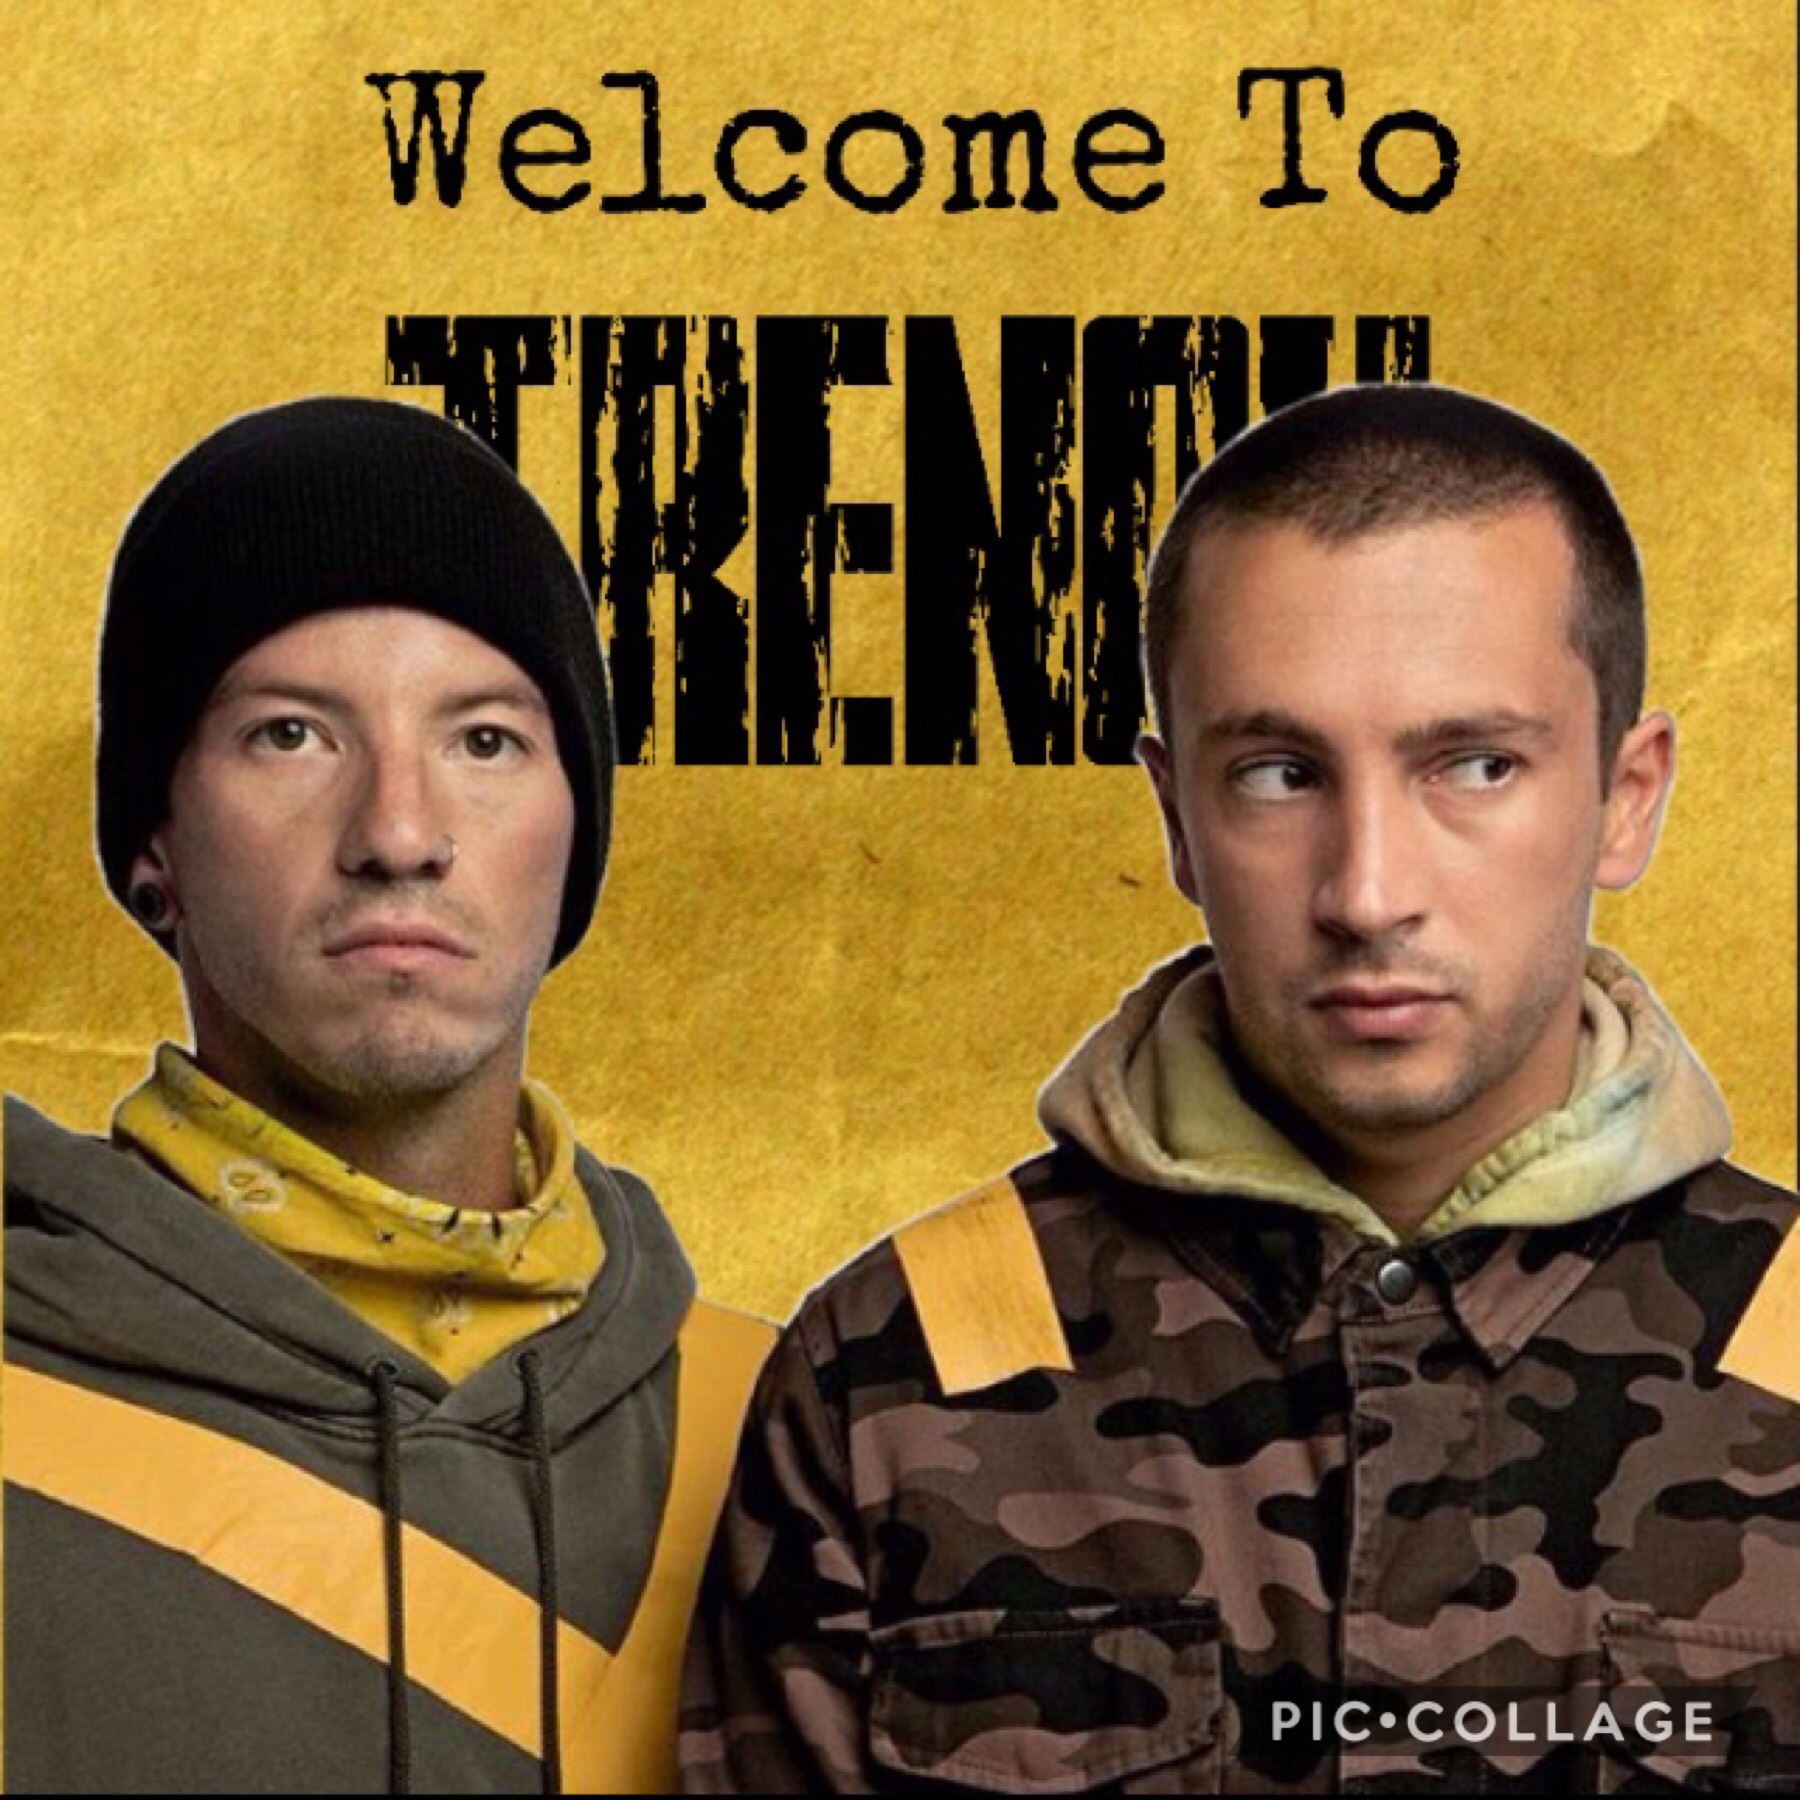 fav song from trench go:
BANDITO